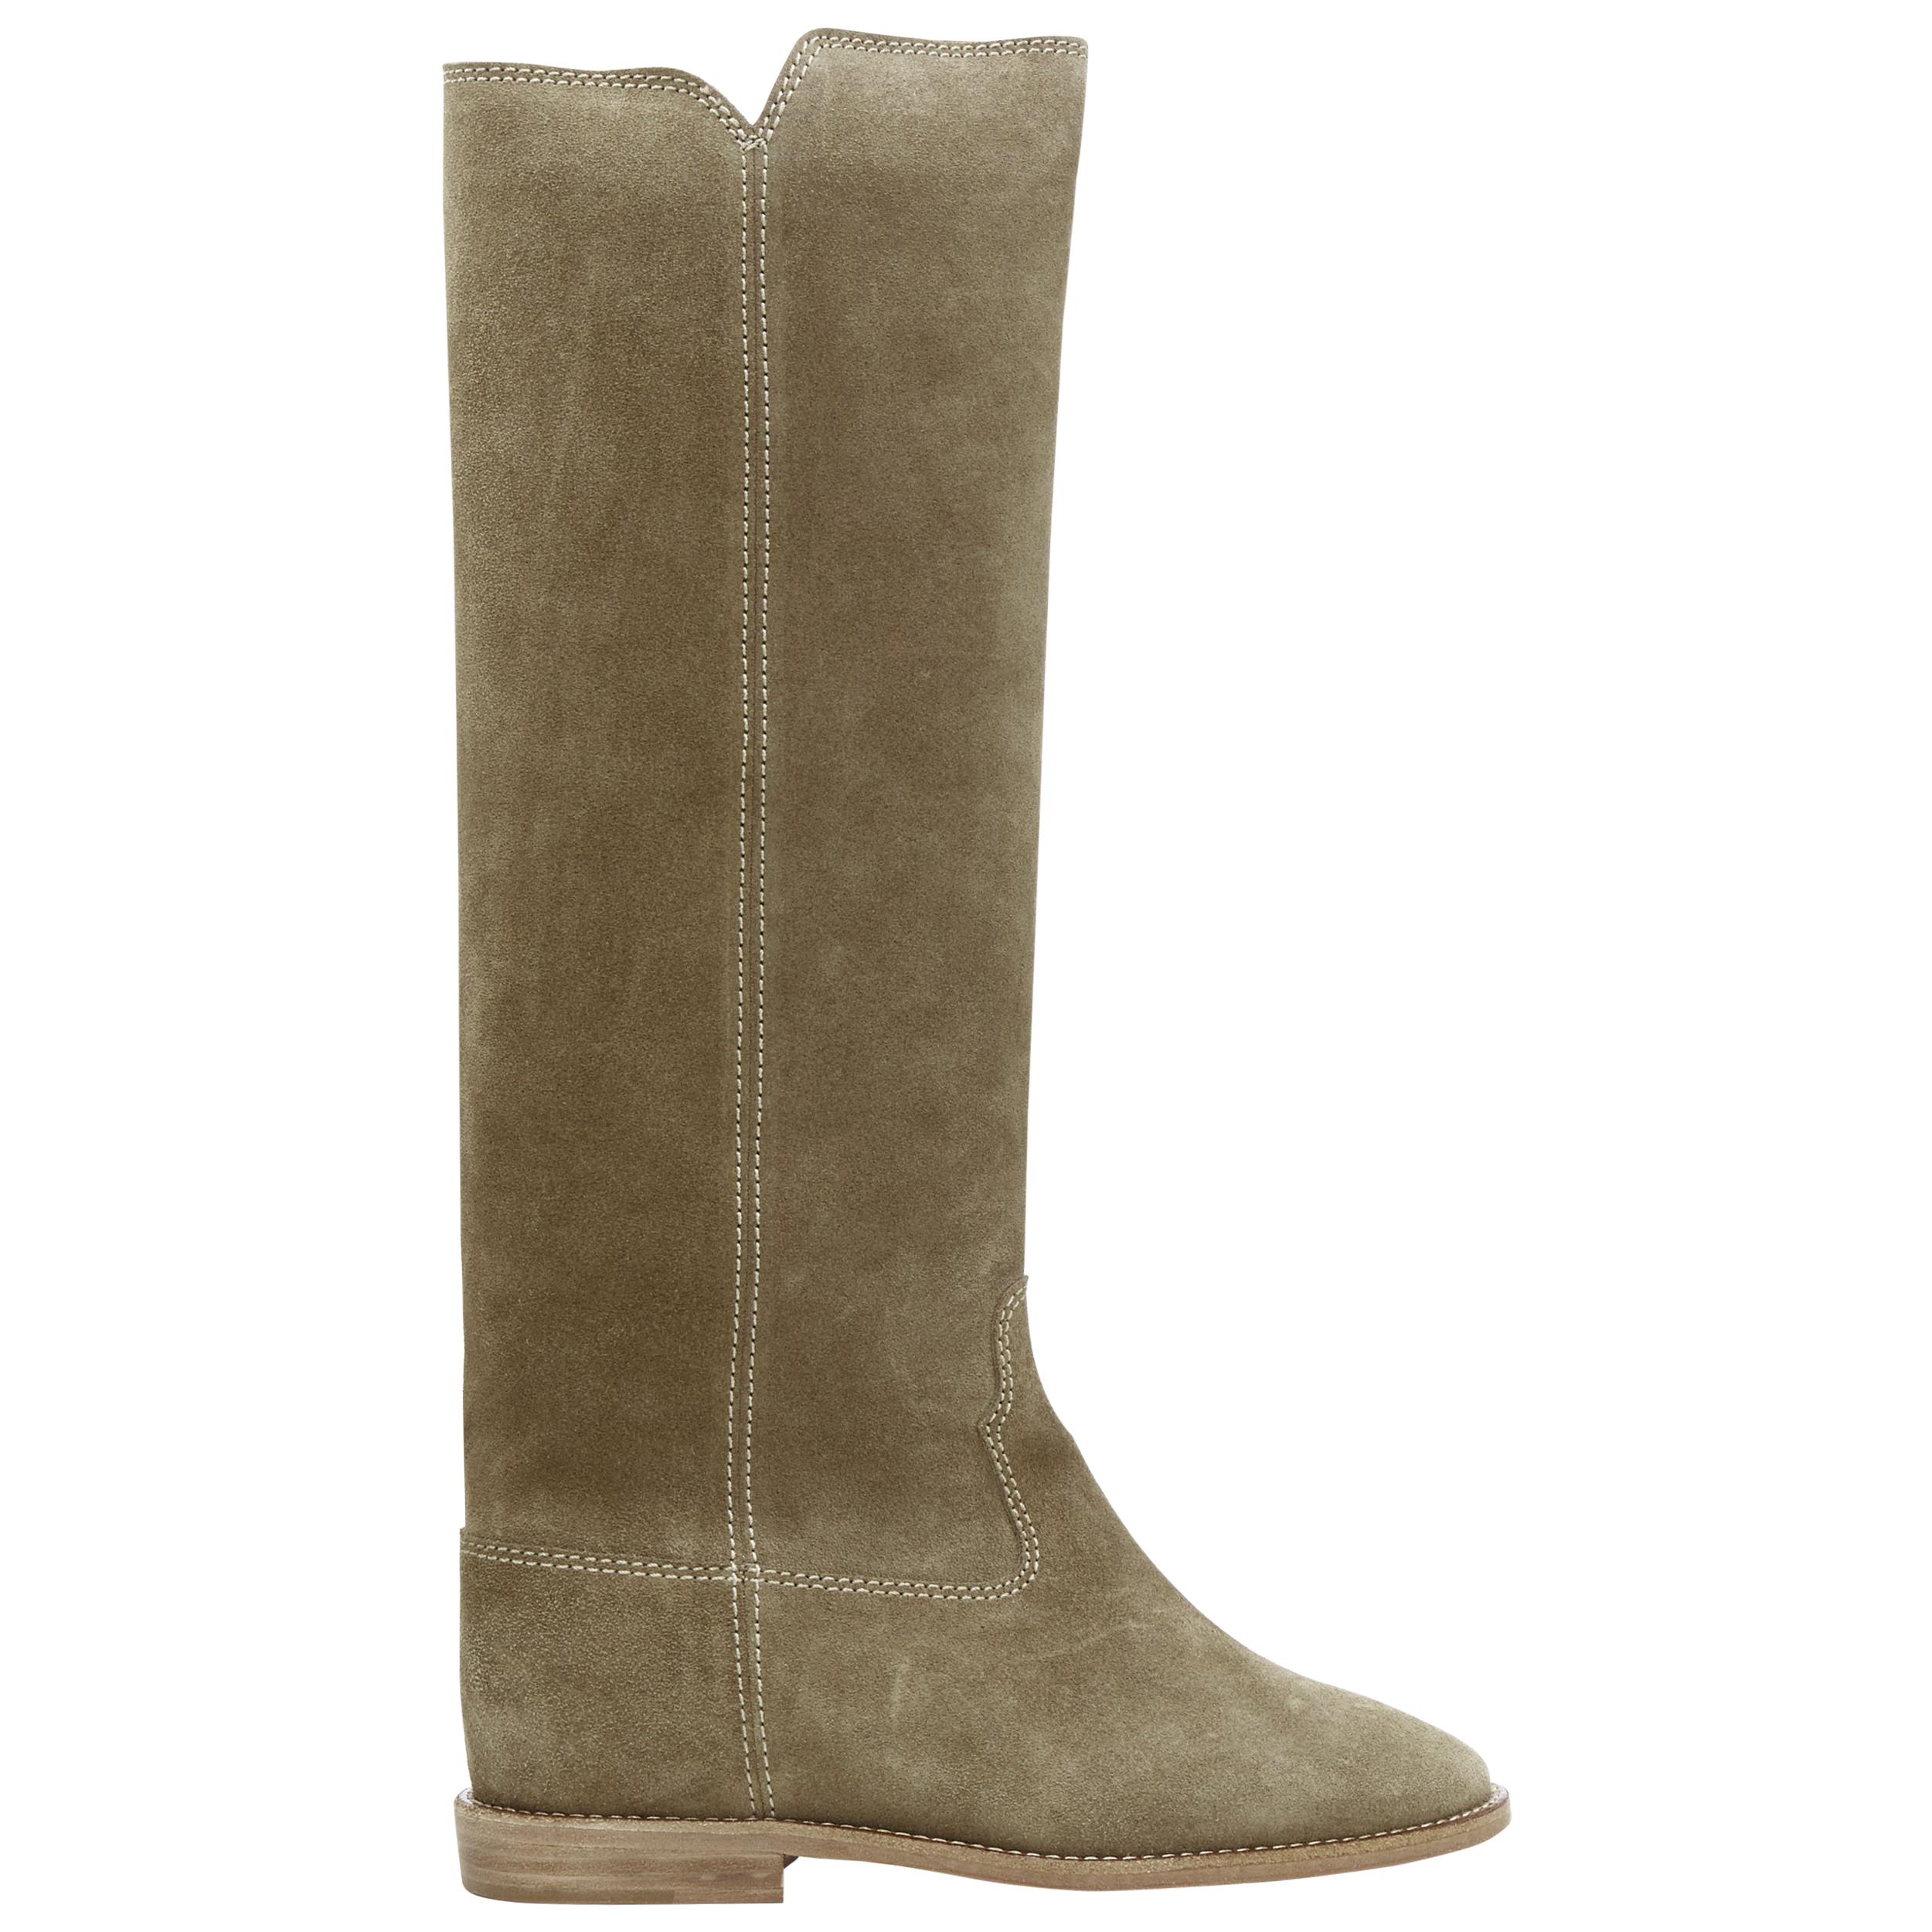 new ISABEL MARANT Cleave Taupe suede concealed wedge knee high western boot EU35